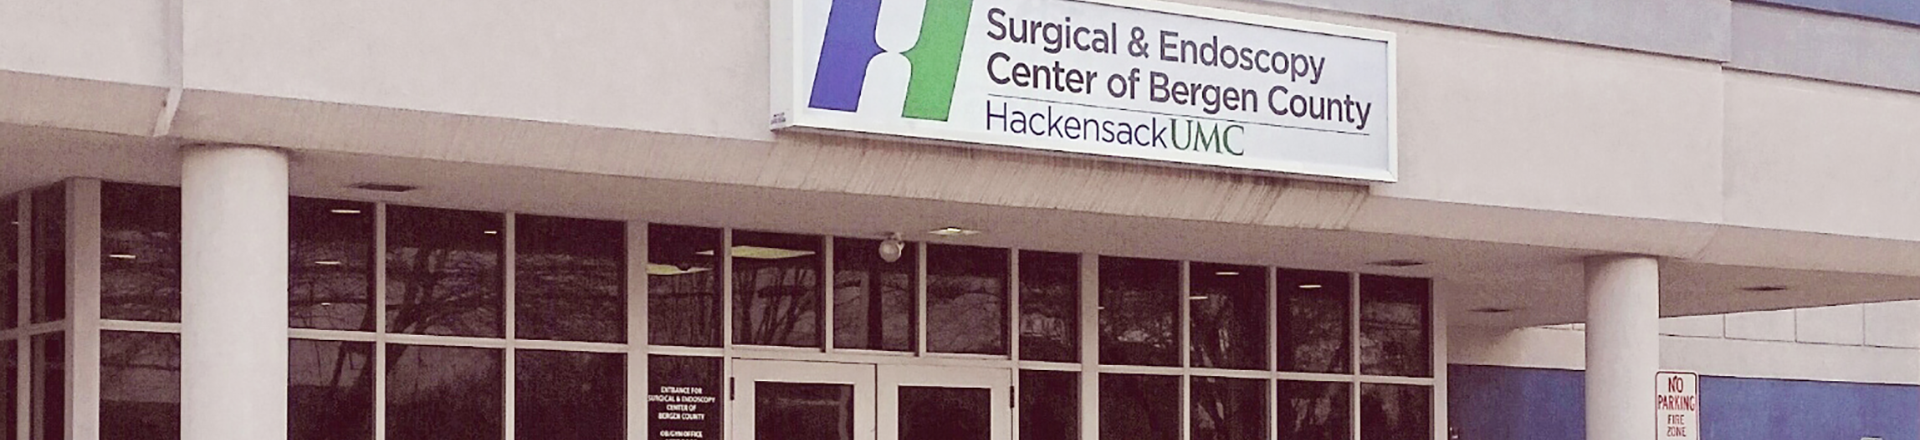 Surgical and Endoscopy Center of Bergen County